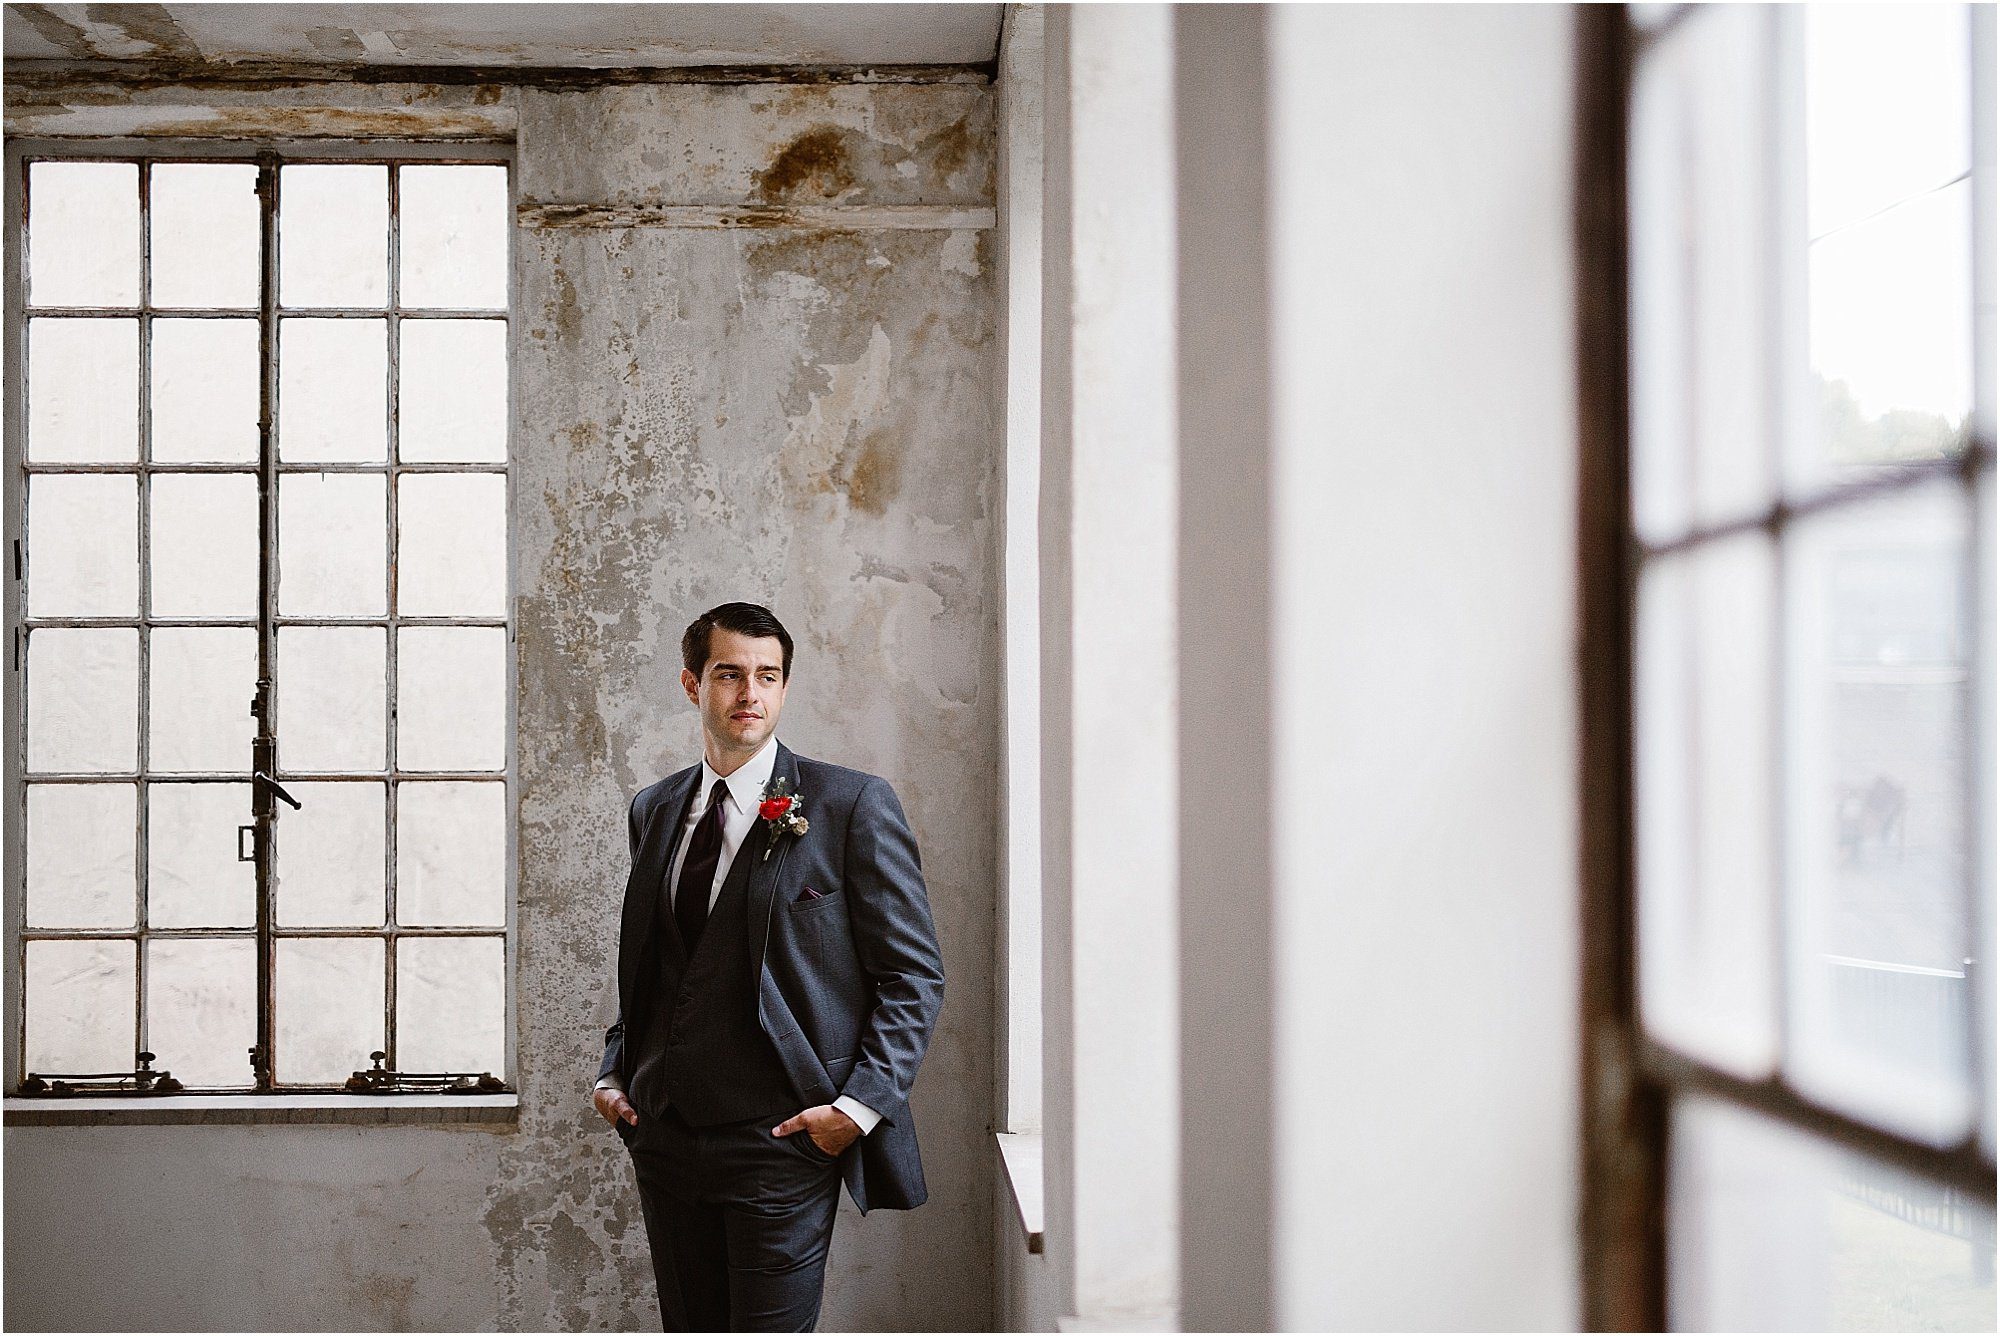 Modern Moody Summer Wedding Inspiration in Knoxville | Erin Morrison Photography www.erinmorrisonphotography.com